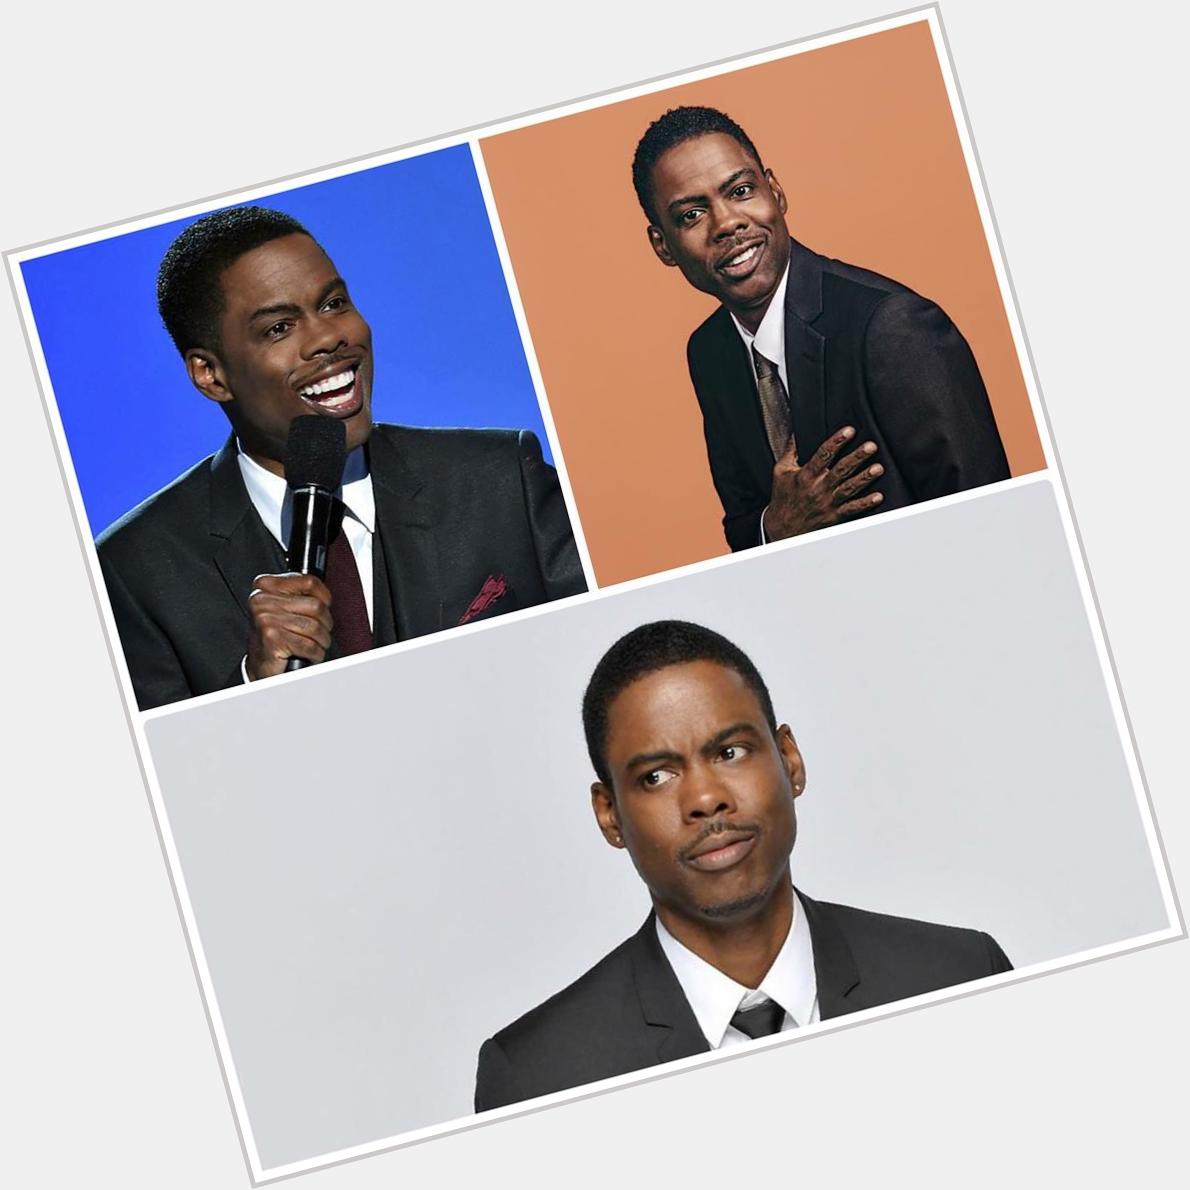 HAPPY BELATED 50th Birthday (2/7) to Chris Rock!!! 